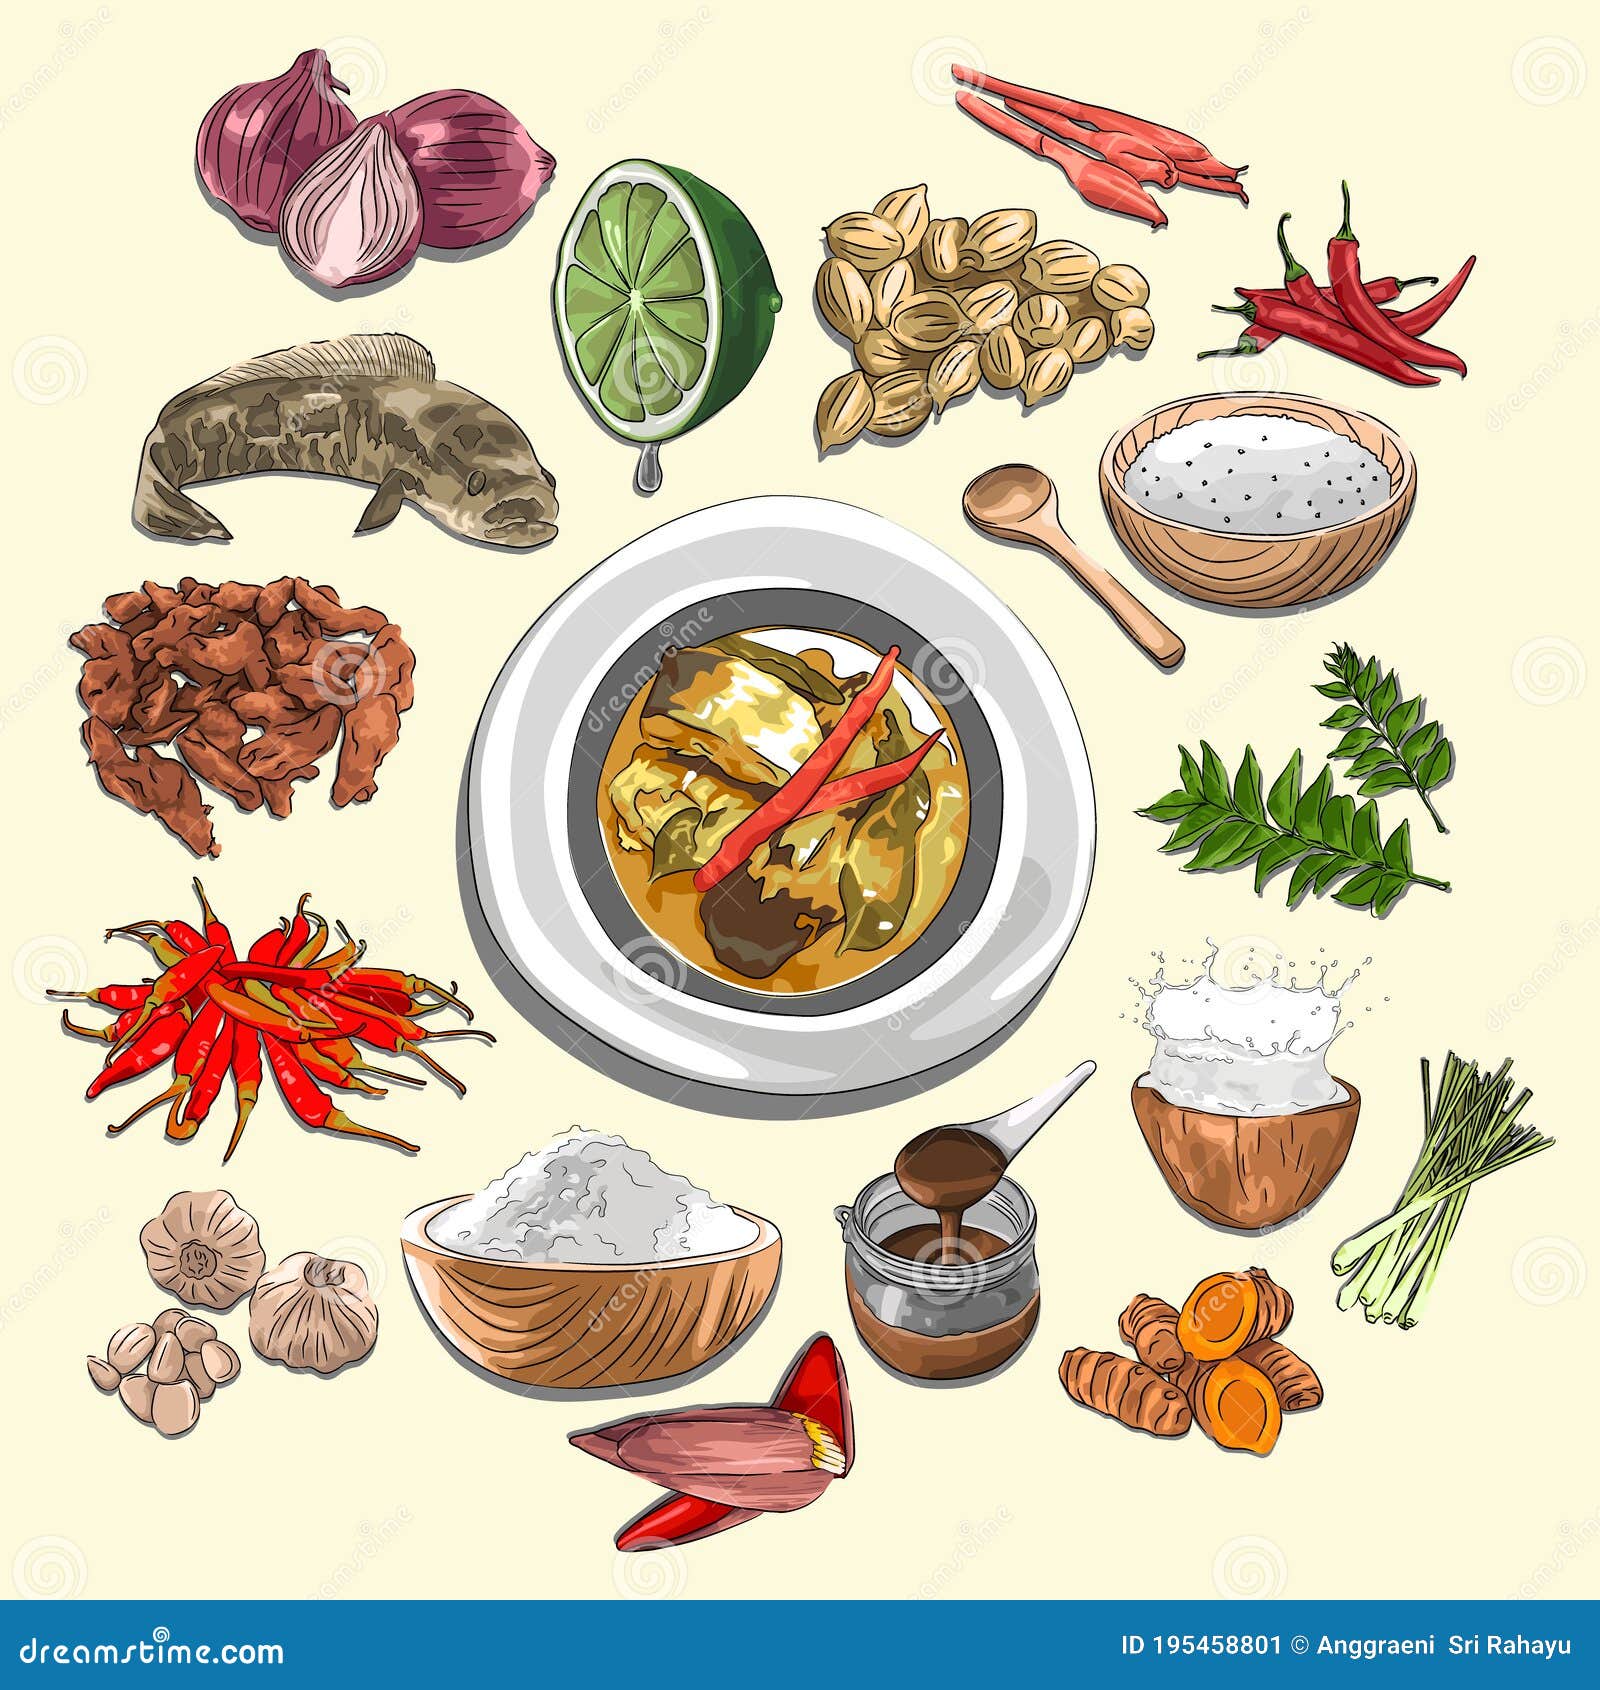 curry eungkot paya  & ingredients, indonesian food from aceh, sketch combine  style